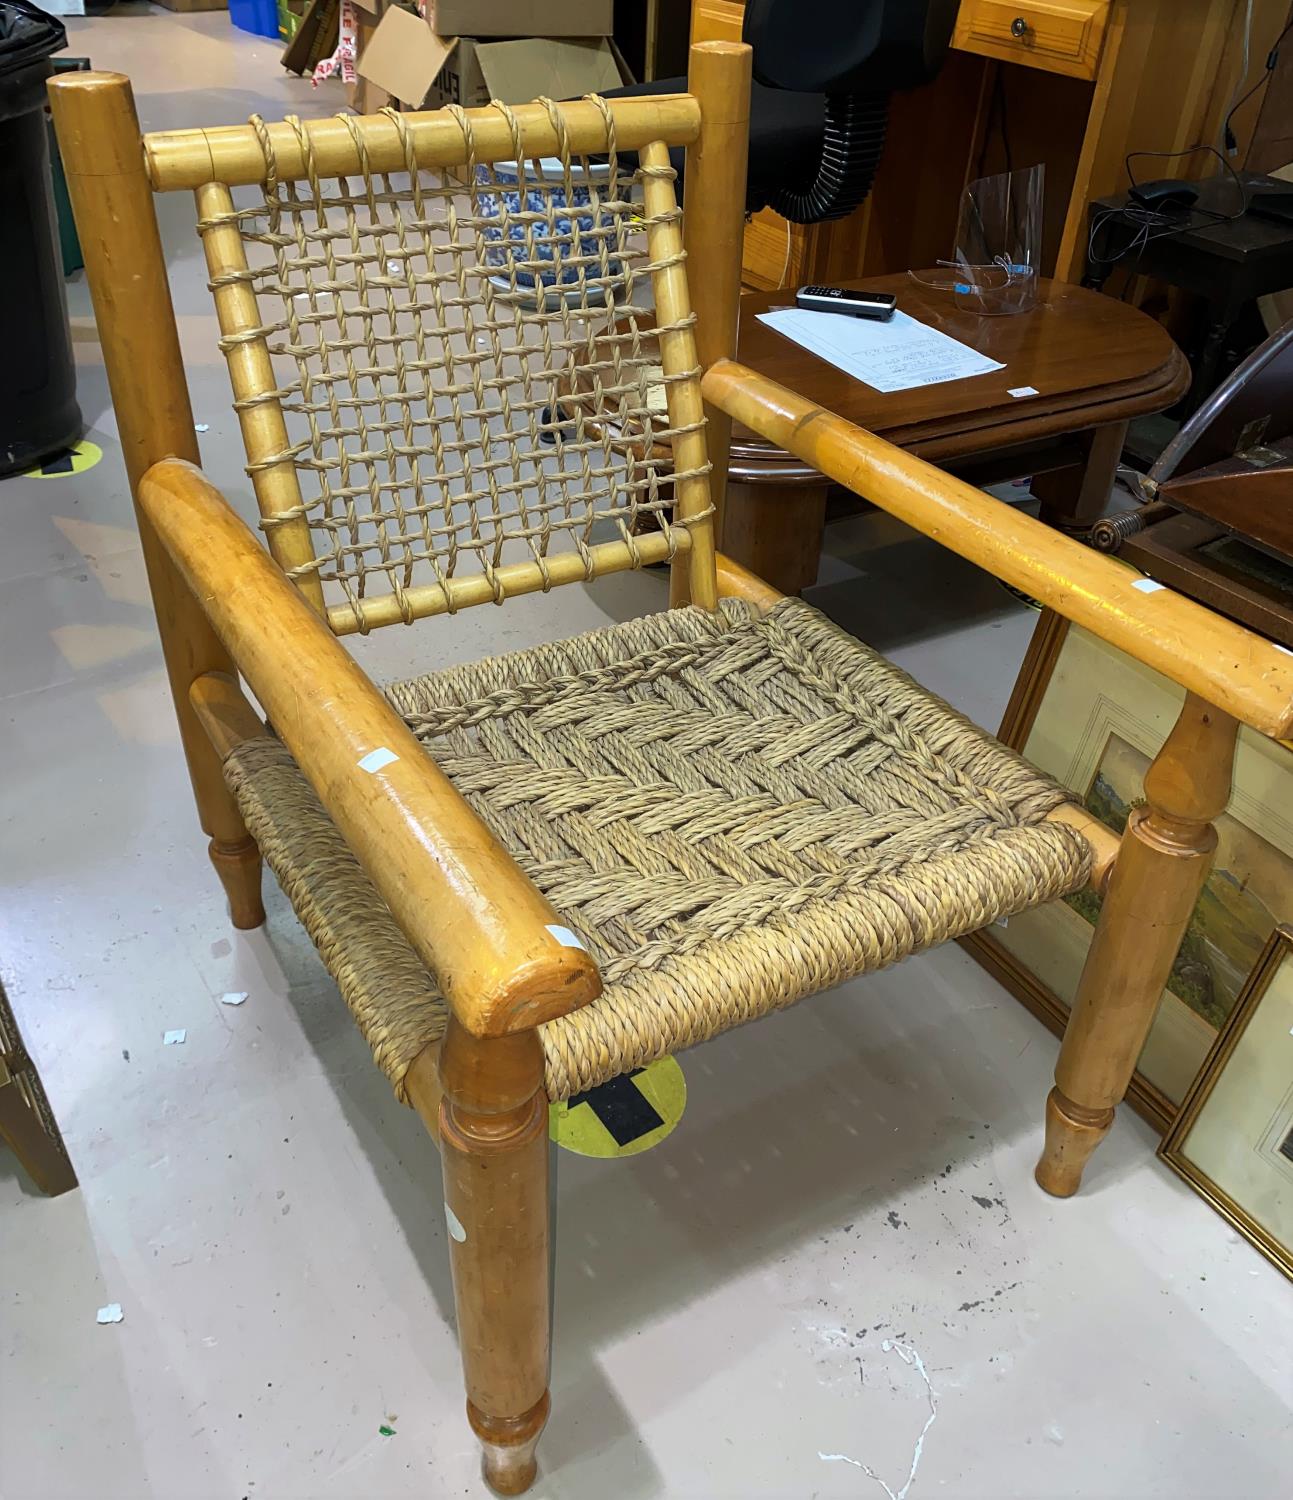 A continental pair of veranda chairs, with woven seagrass seats and backs